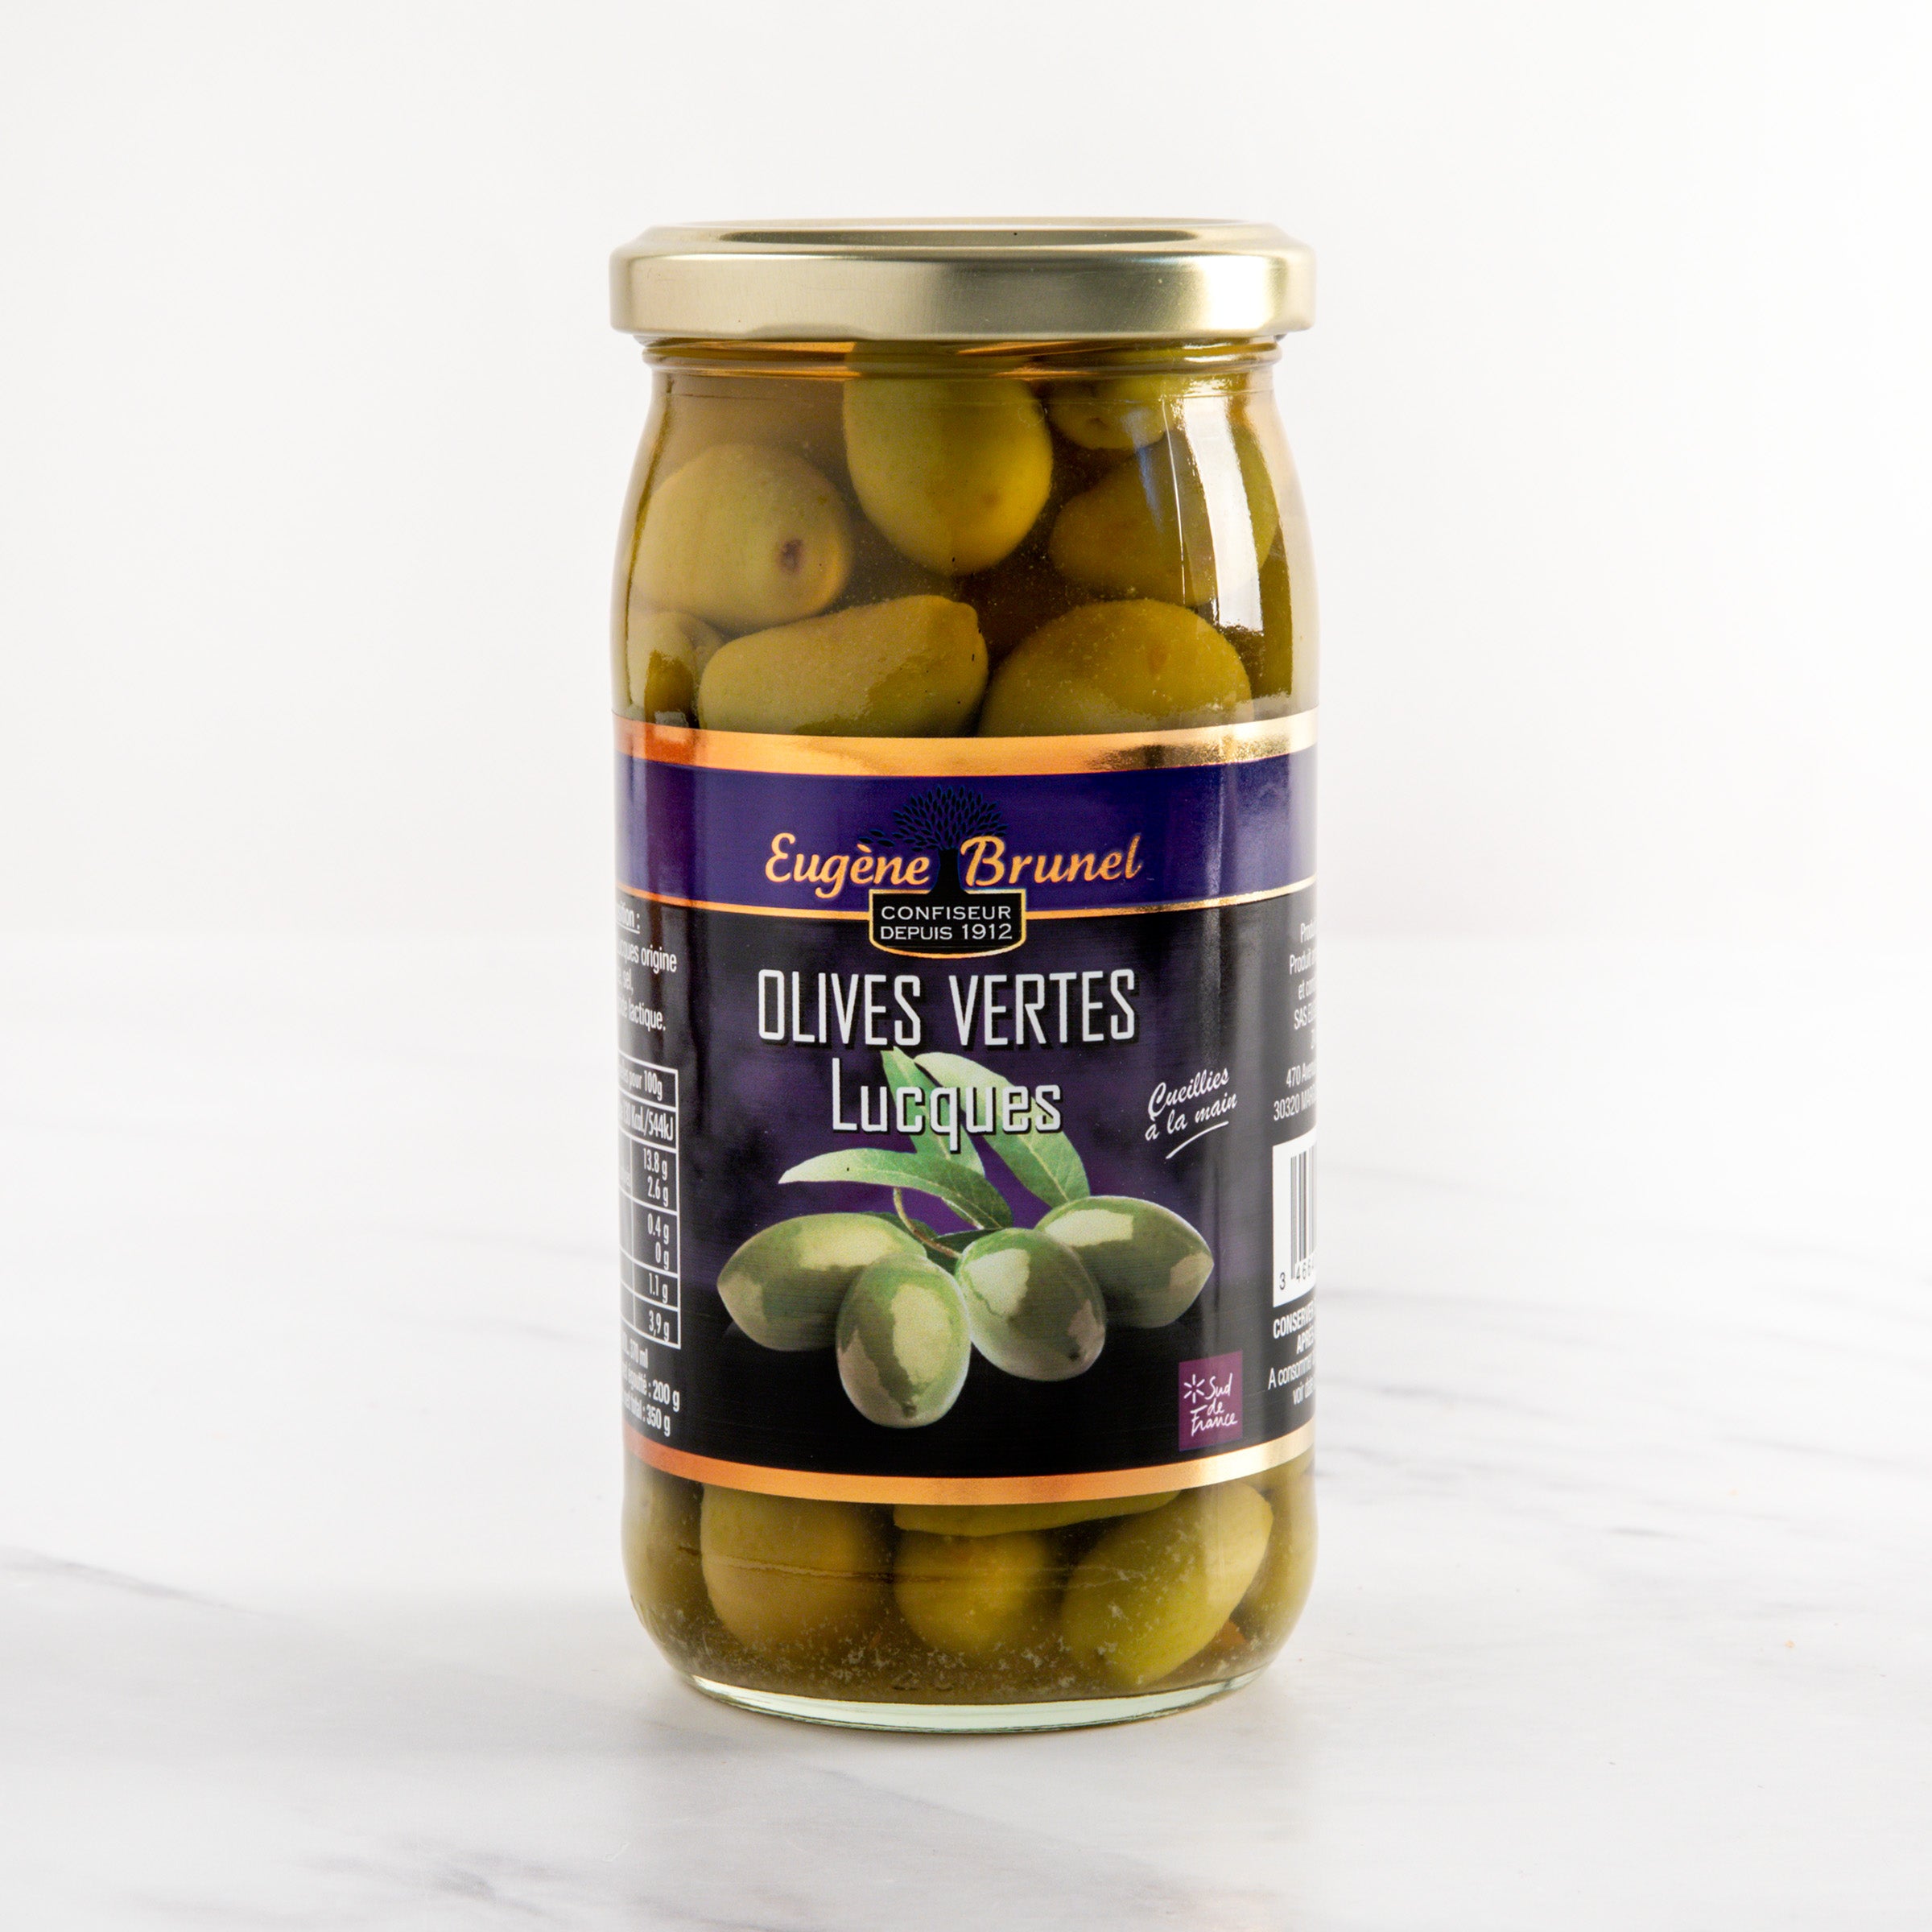 igourmet_15085-lucques olives_Brunel_french green olives